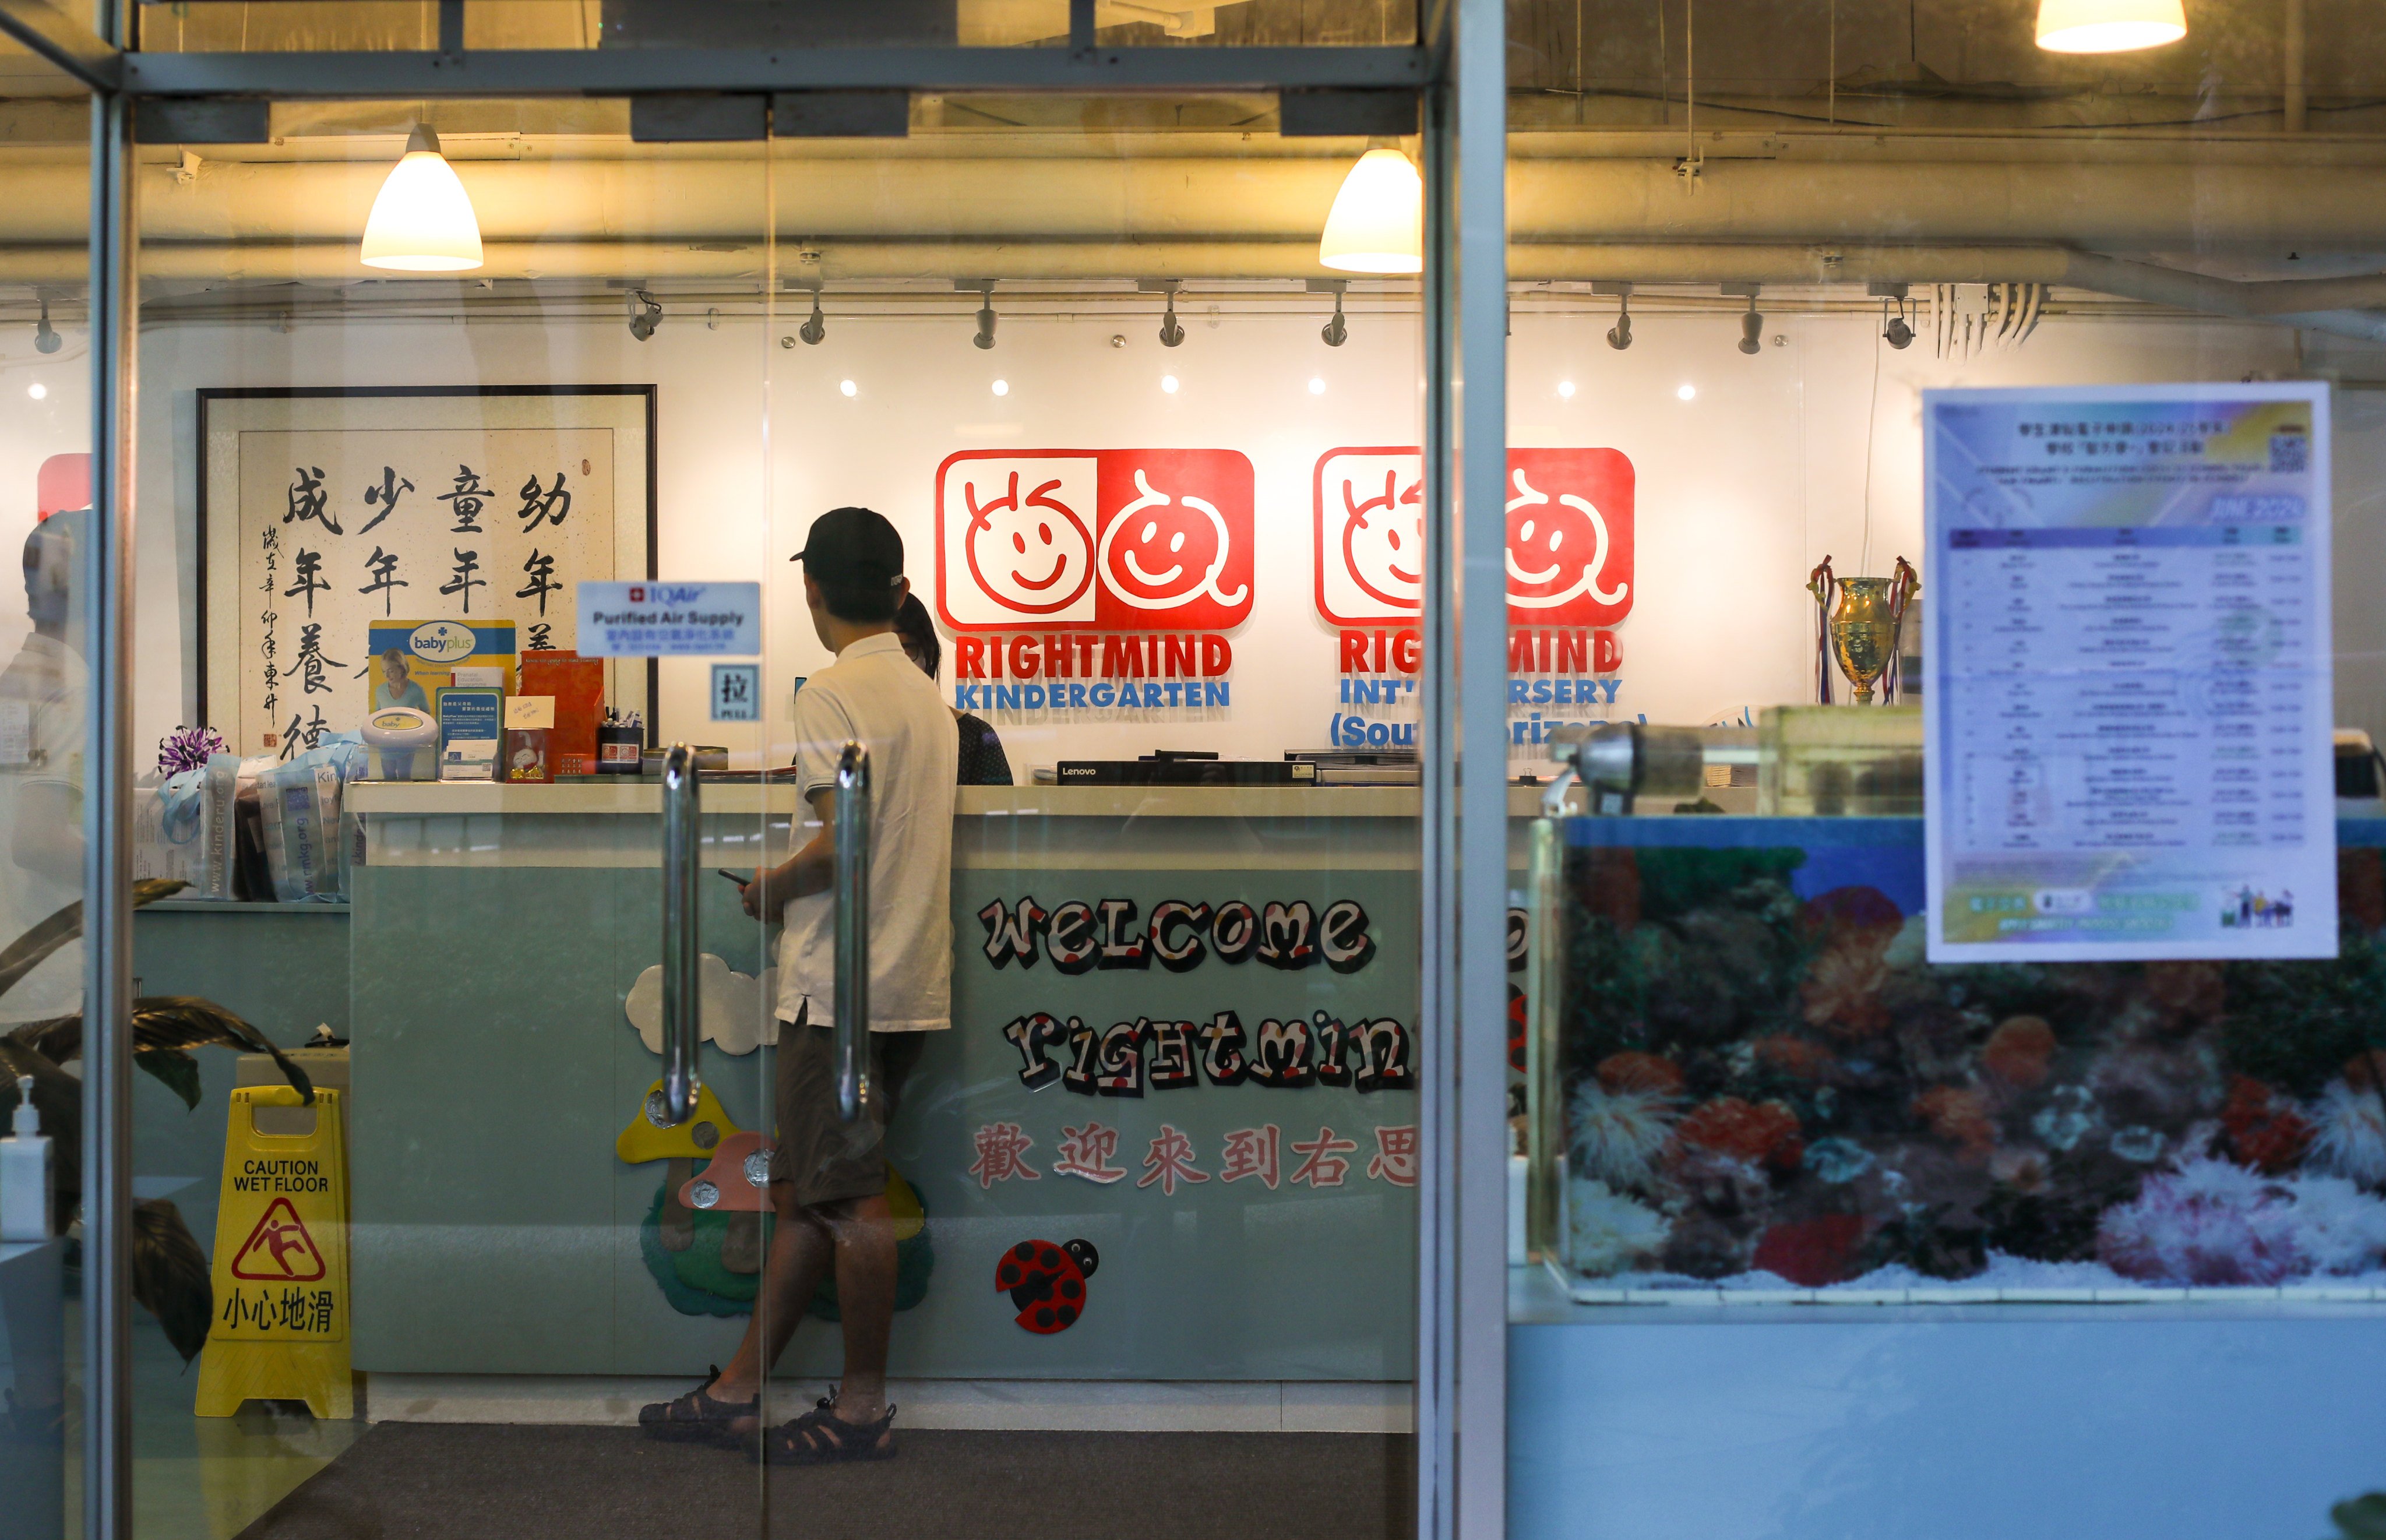 Rightmind Kindergarten has said it will close down after failing to find investors. Photo: Xiaomei Chen